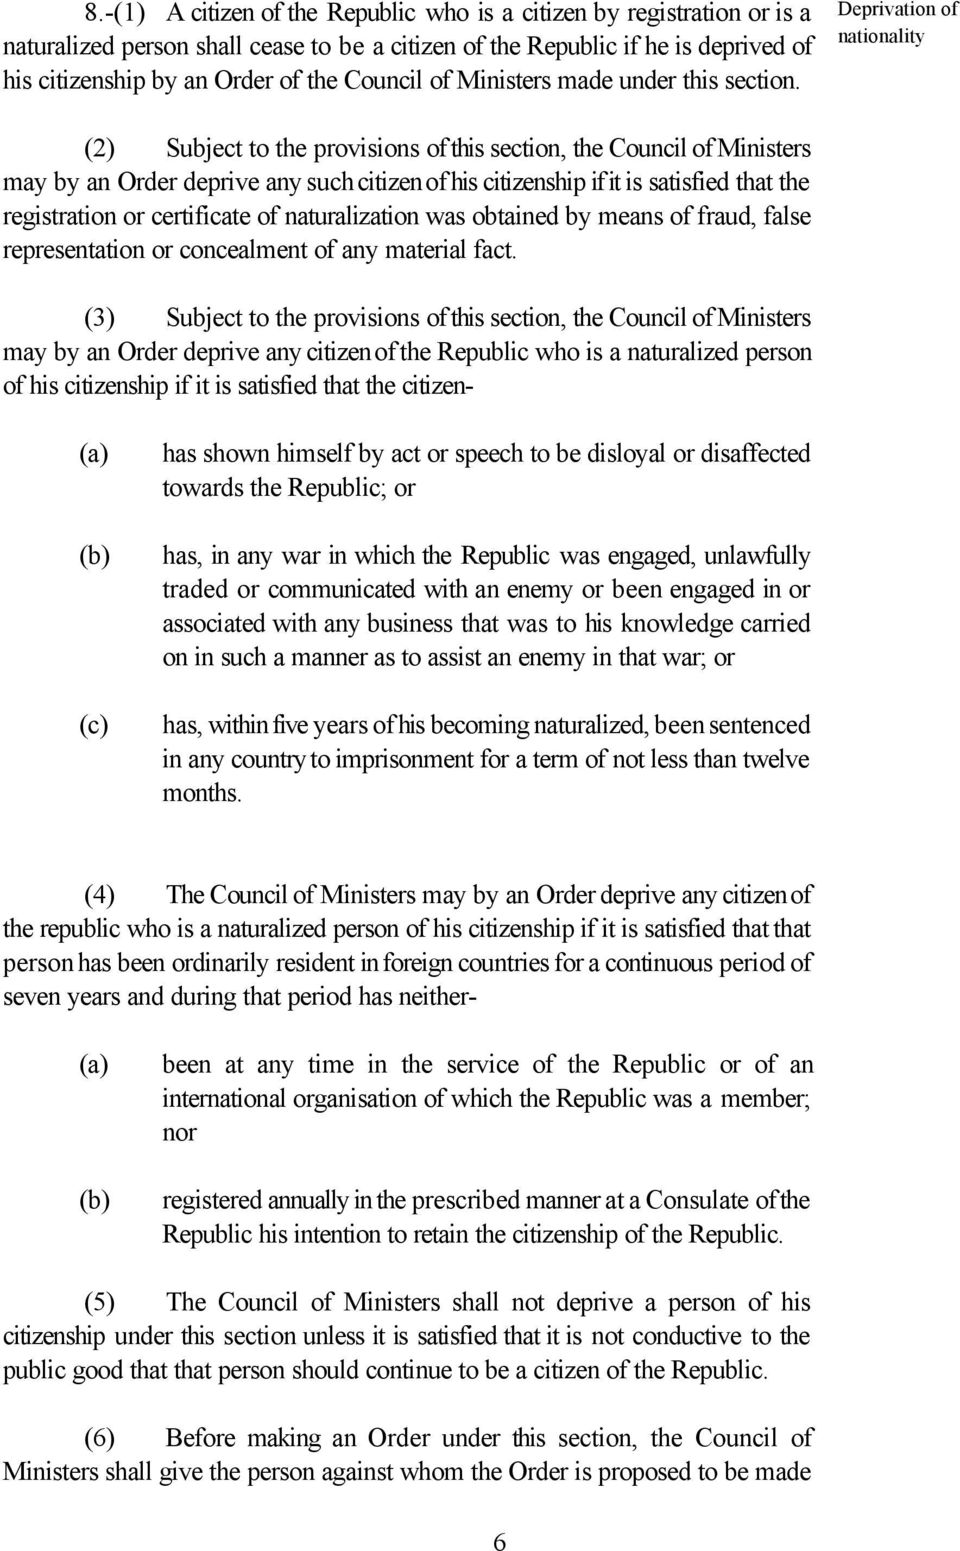 Deprivation of nationality (2) Subject to the provisions of this section, the Council of Ministers may by an Order deprive any such citizen of his citizenship if it is satisfied that the registration